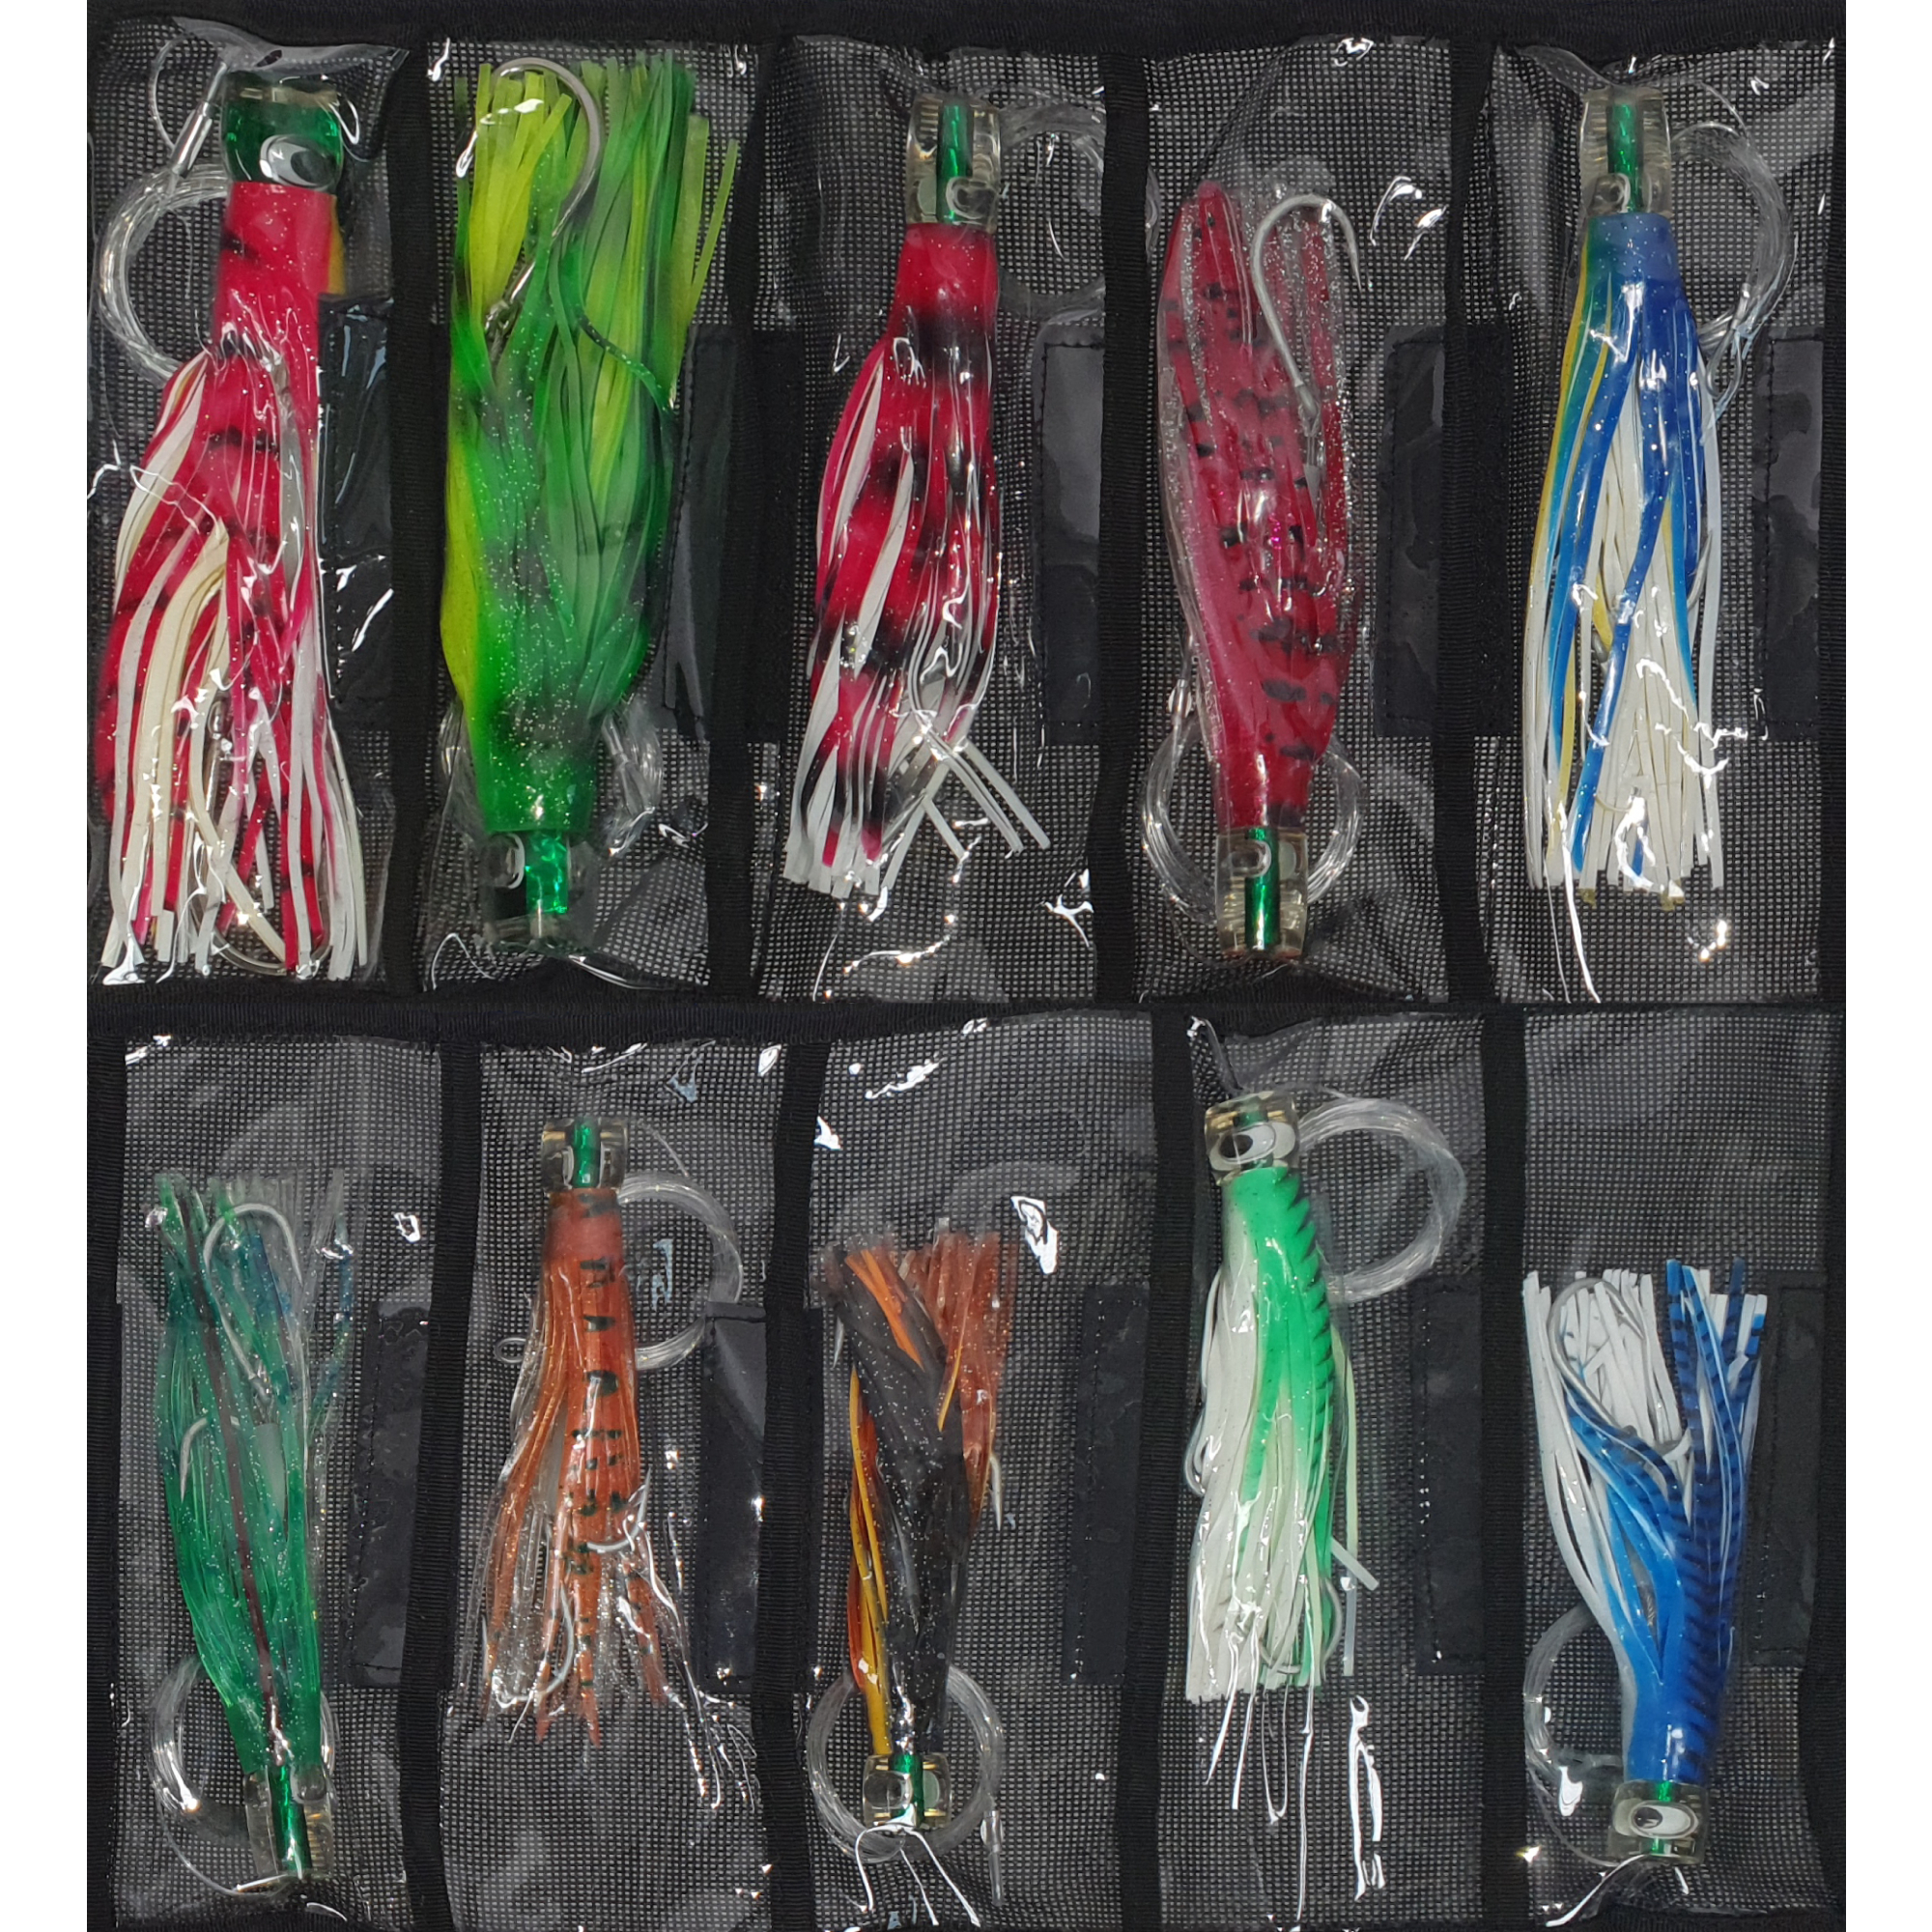 Skirted Trolling Lures Bag – X10 Pcs. With Rigged Line & Hook • Vtackle